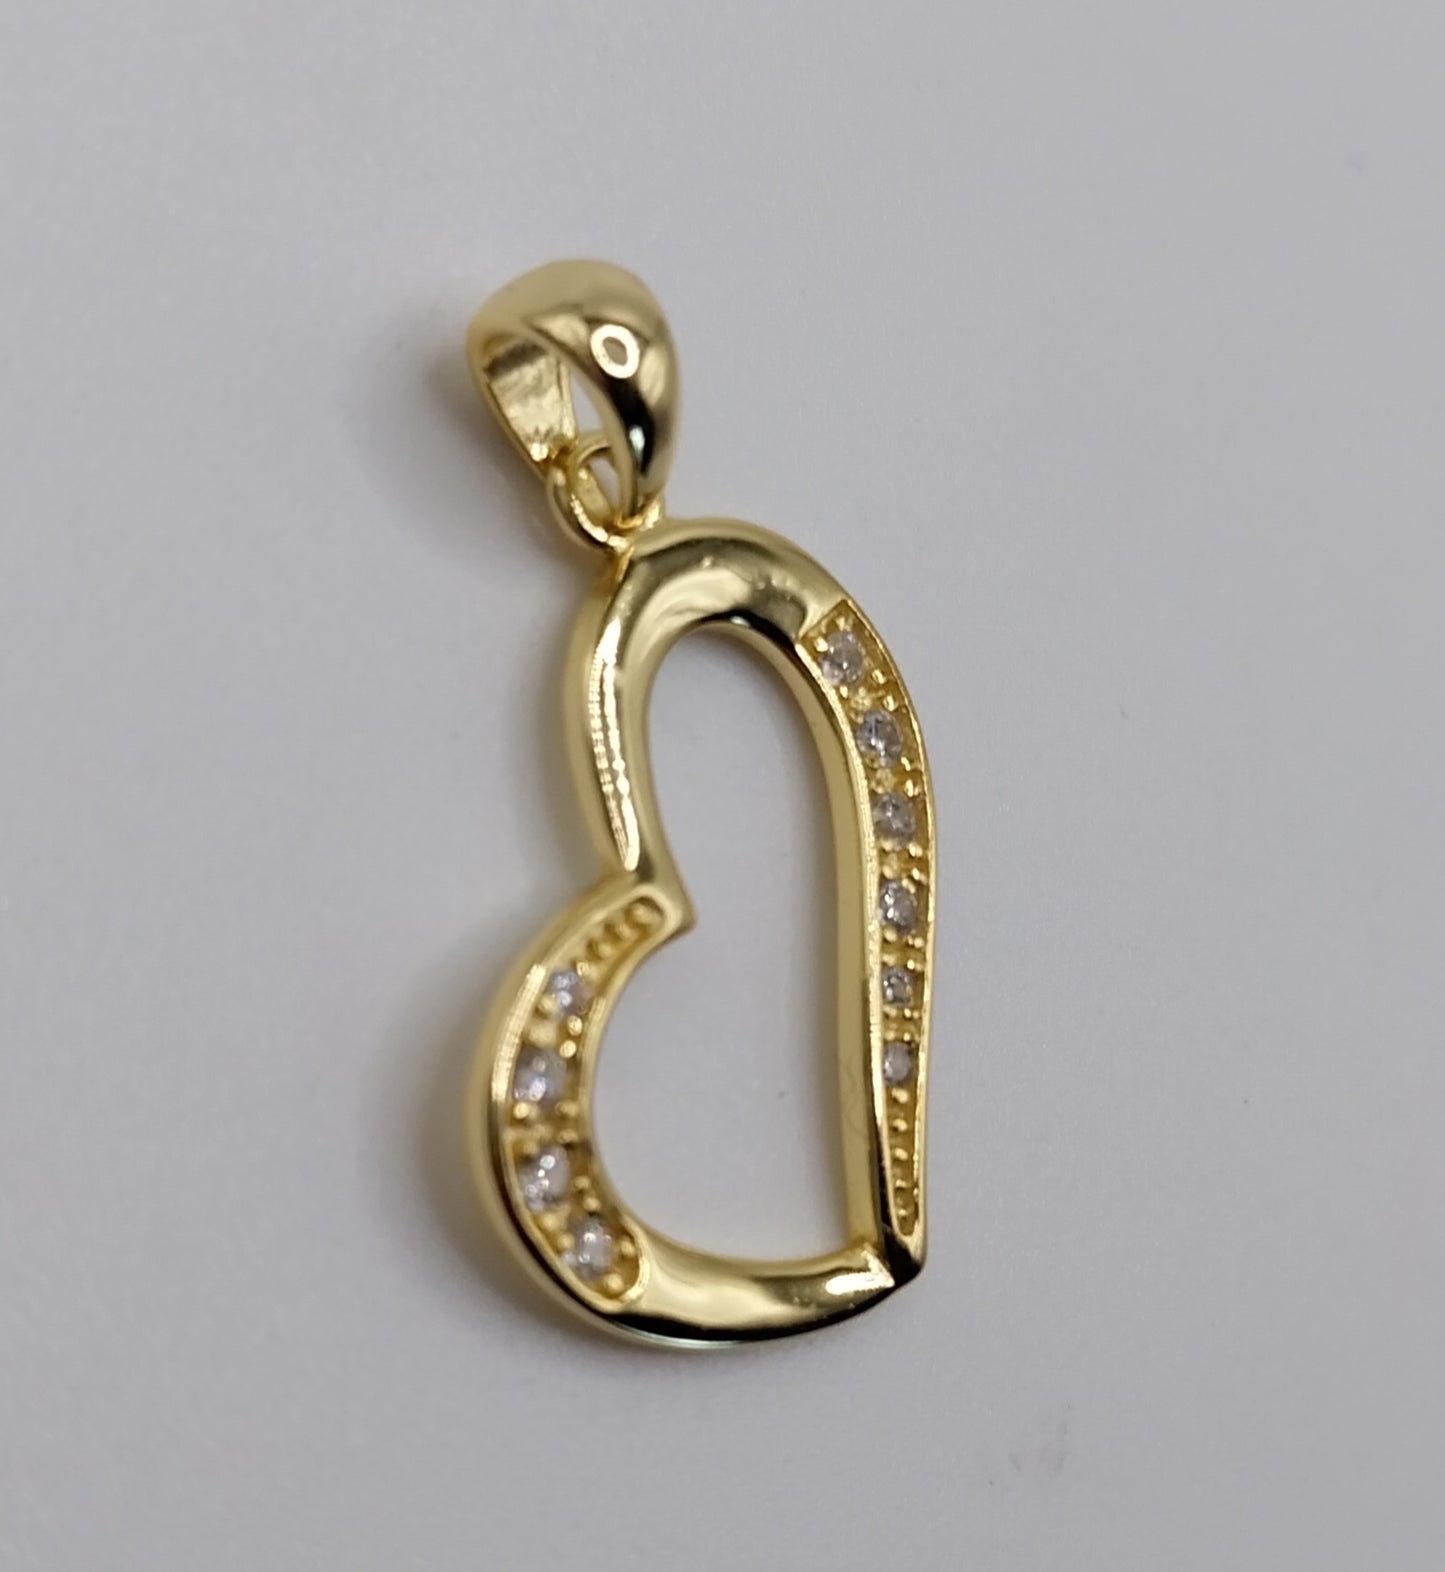 Heart Pendant Silver 925 Gold Plated with Cubic Zirconia